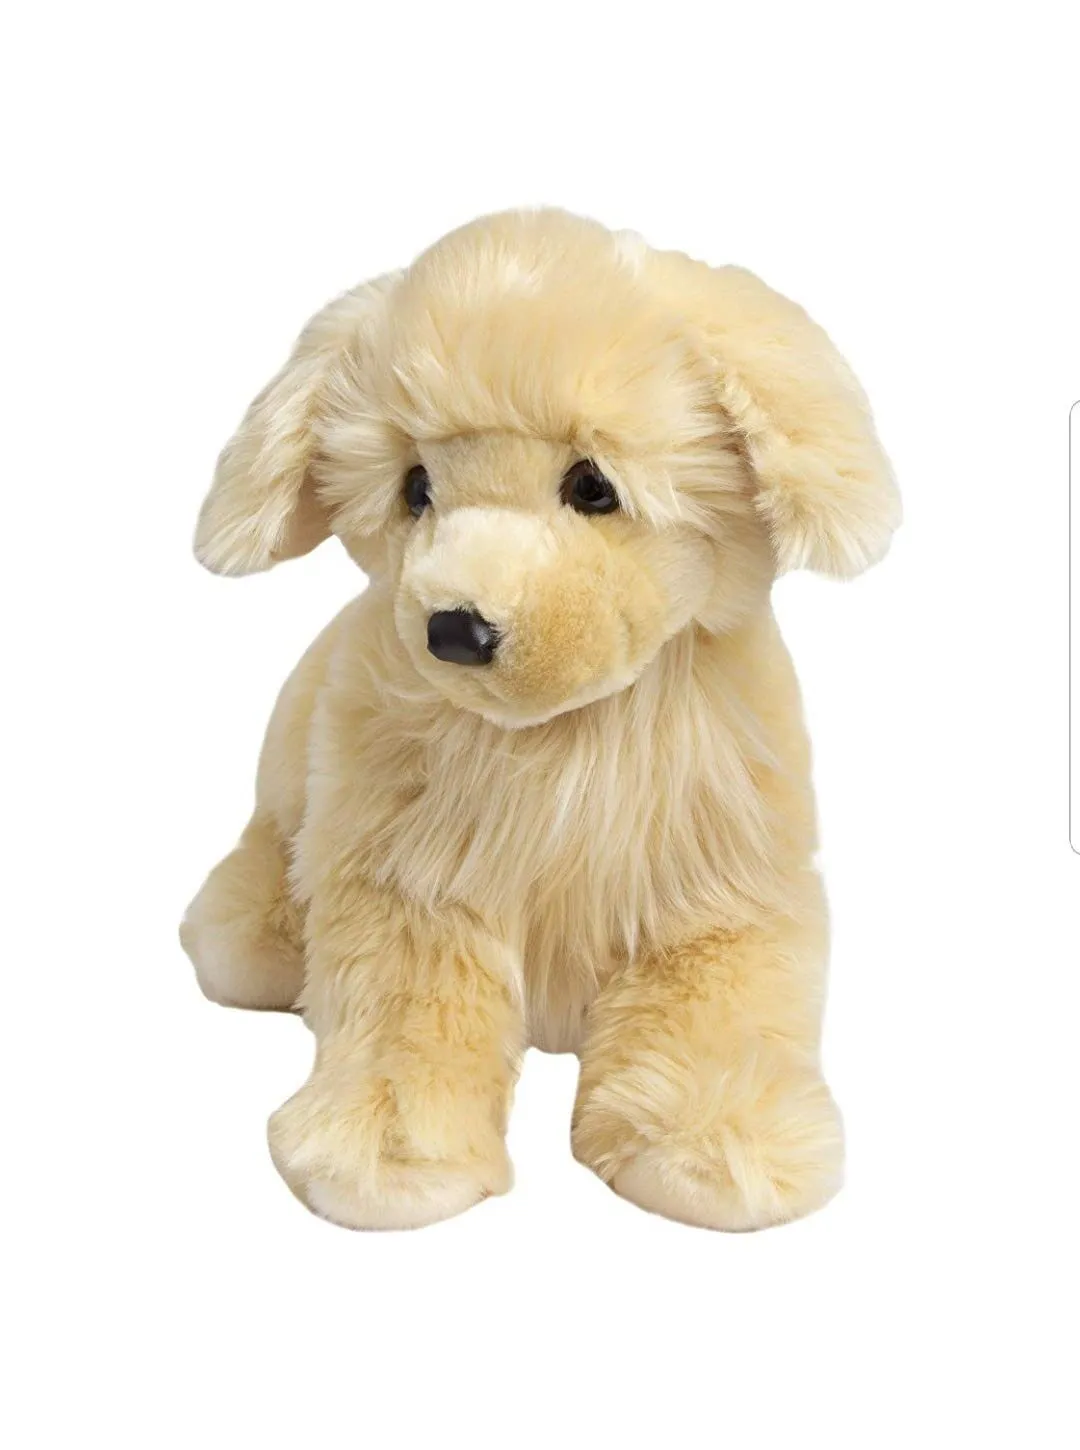 Choosing the Best Toys for Your Golden Retriever Puppy: Tips and Recommendations from a Dog Expert